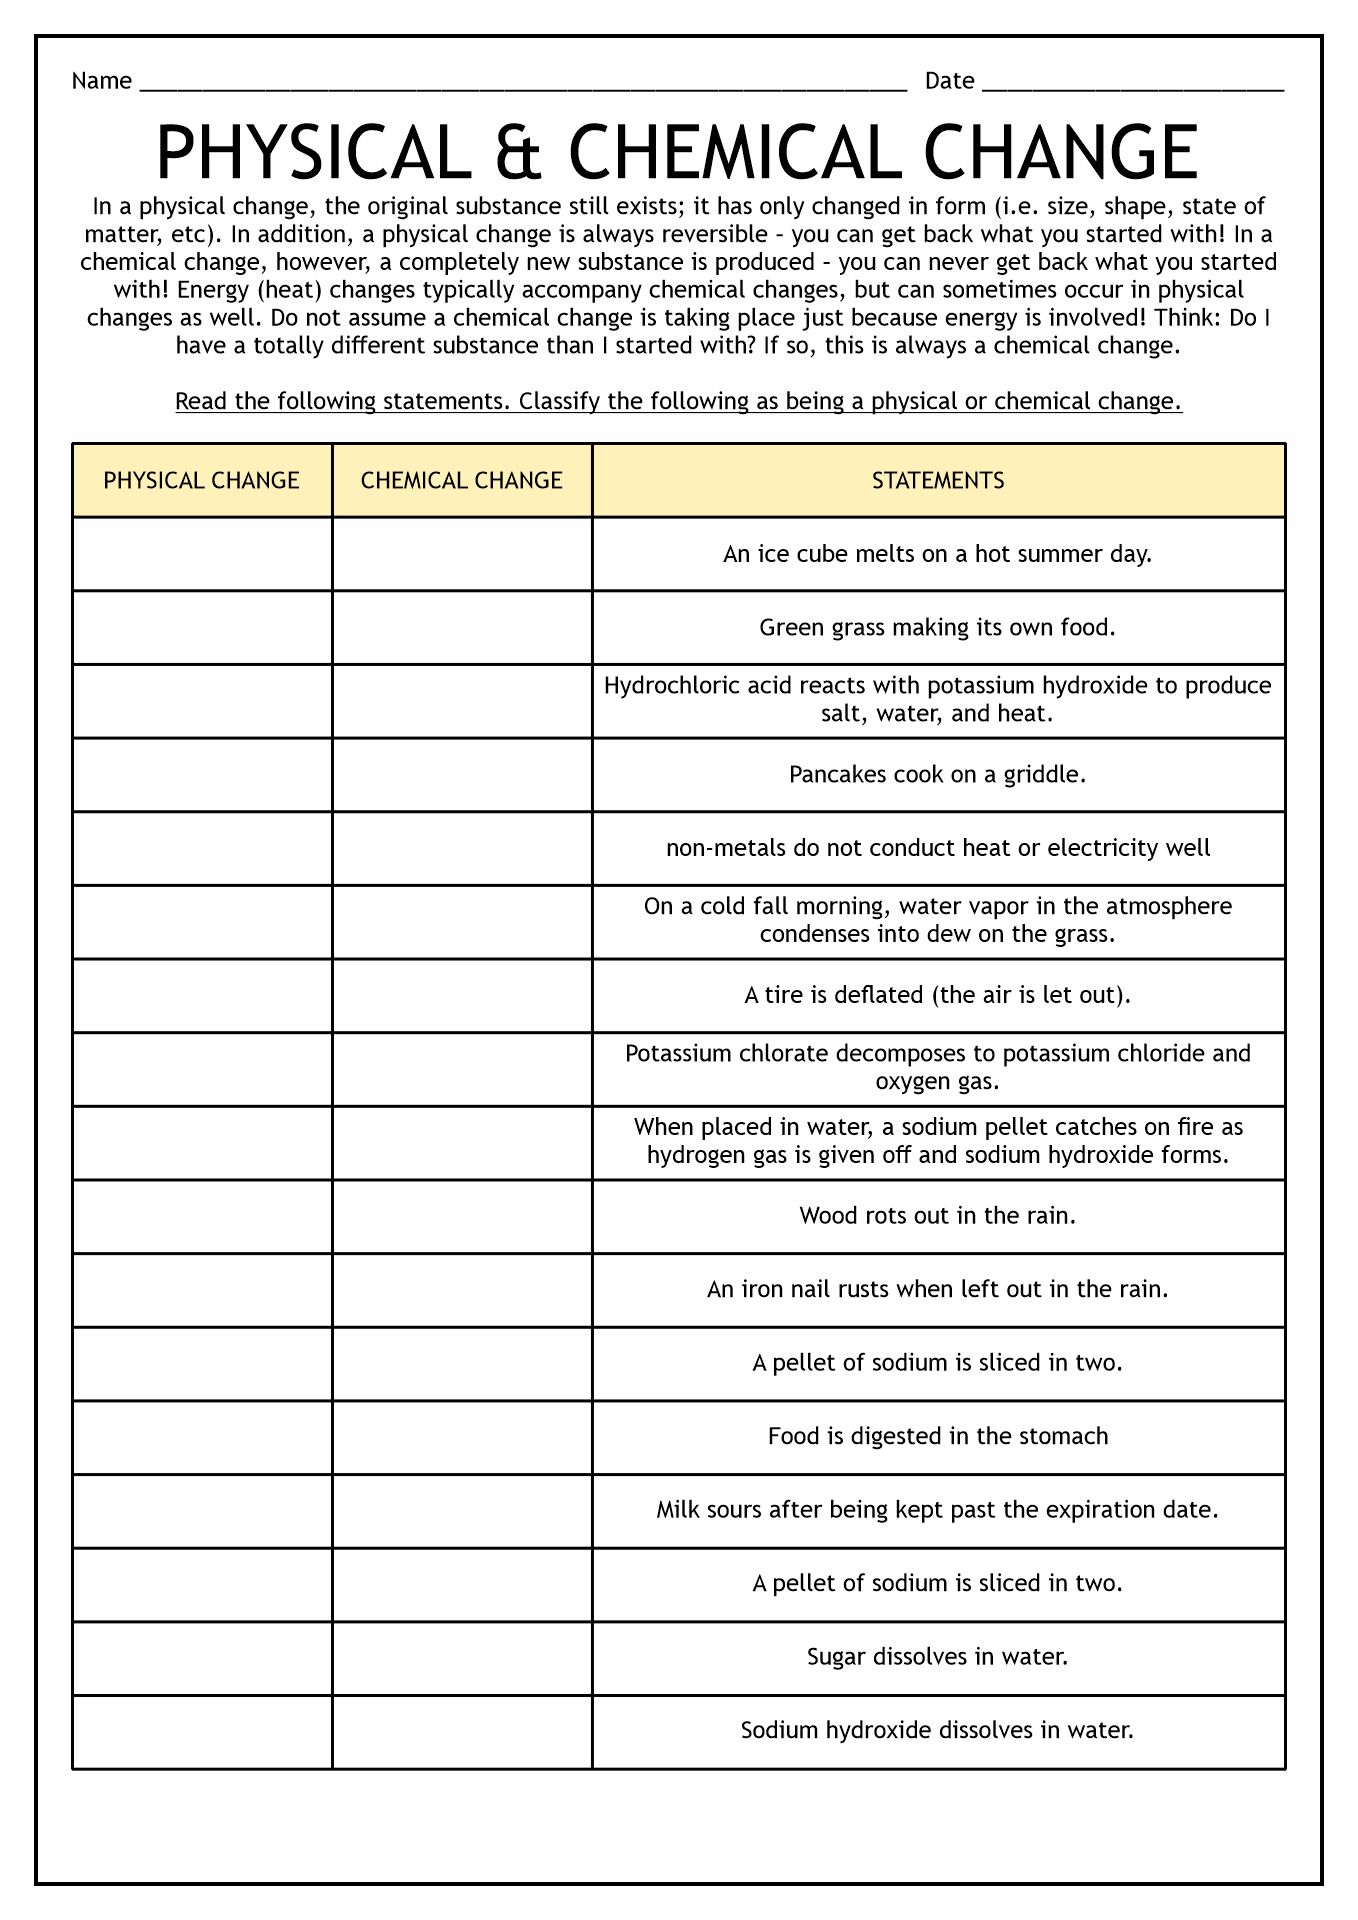 14 Best Images of Physical Changes Matter Worksheets - Matter Physical